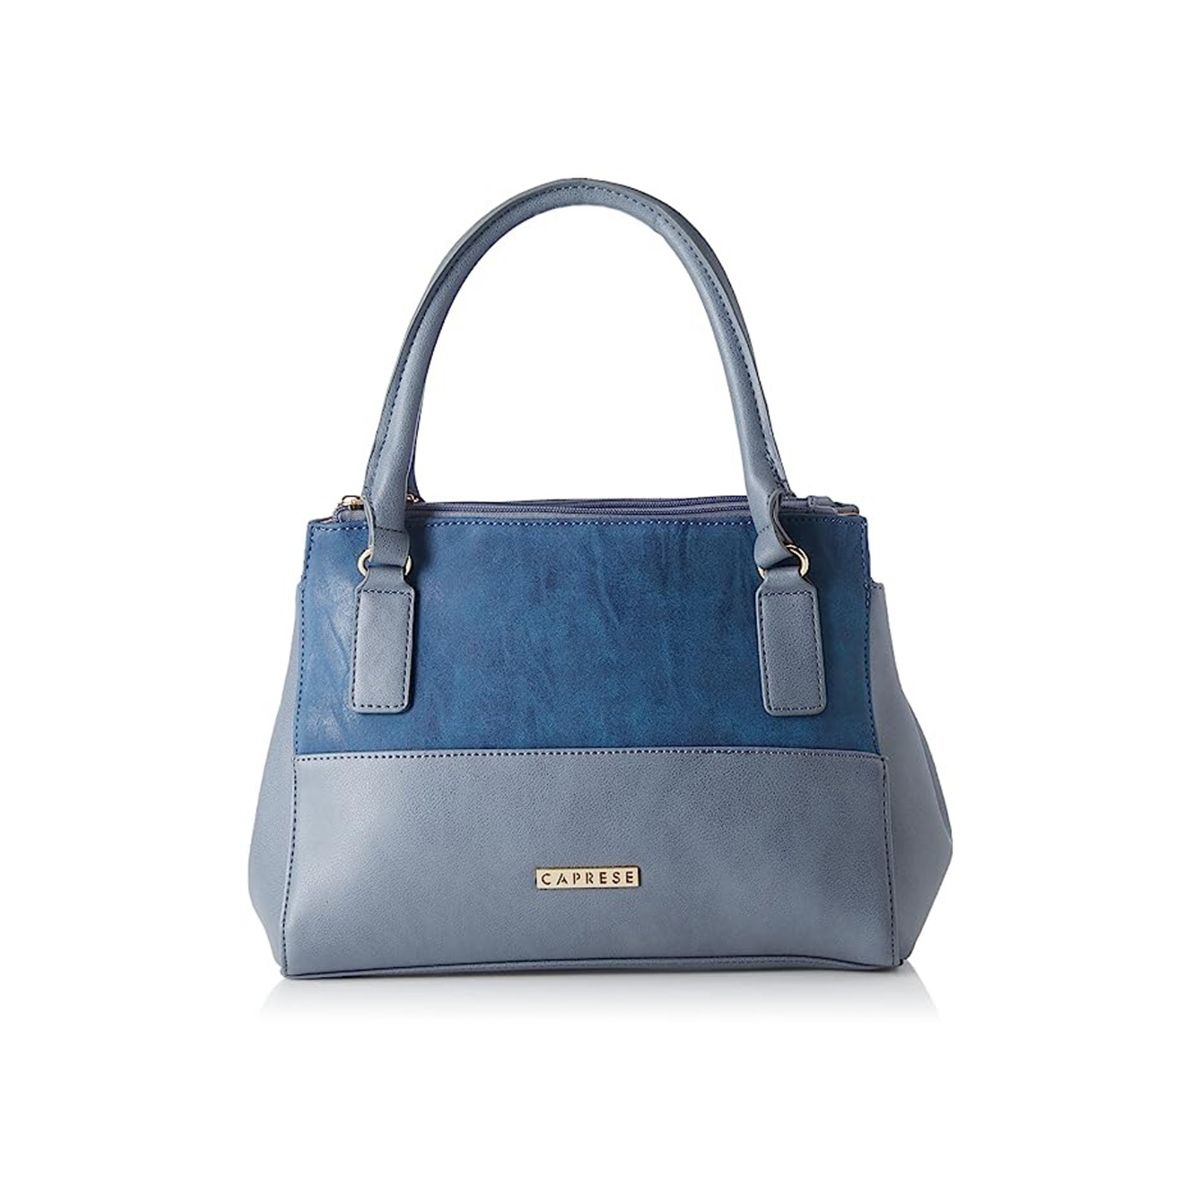 Luxury Designer 10A Tote Handbag For Women Pure Leather Material, Liner,  Fashionable Caprese Shoulder Bags In For Casual Travel From Xuanzhan33,  $391.71 | DHgate.Com